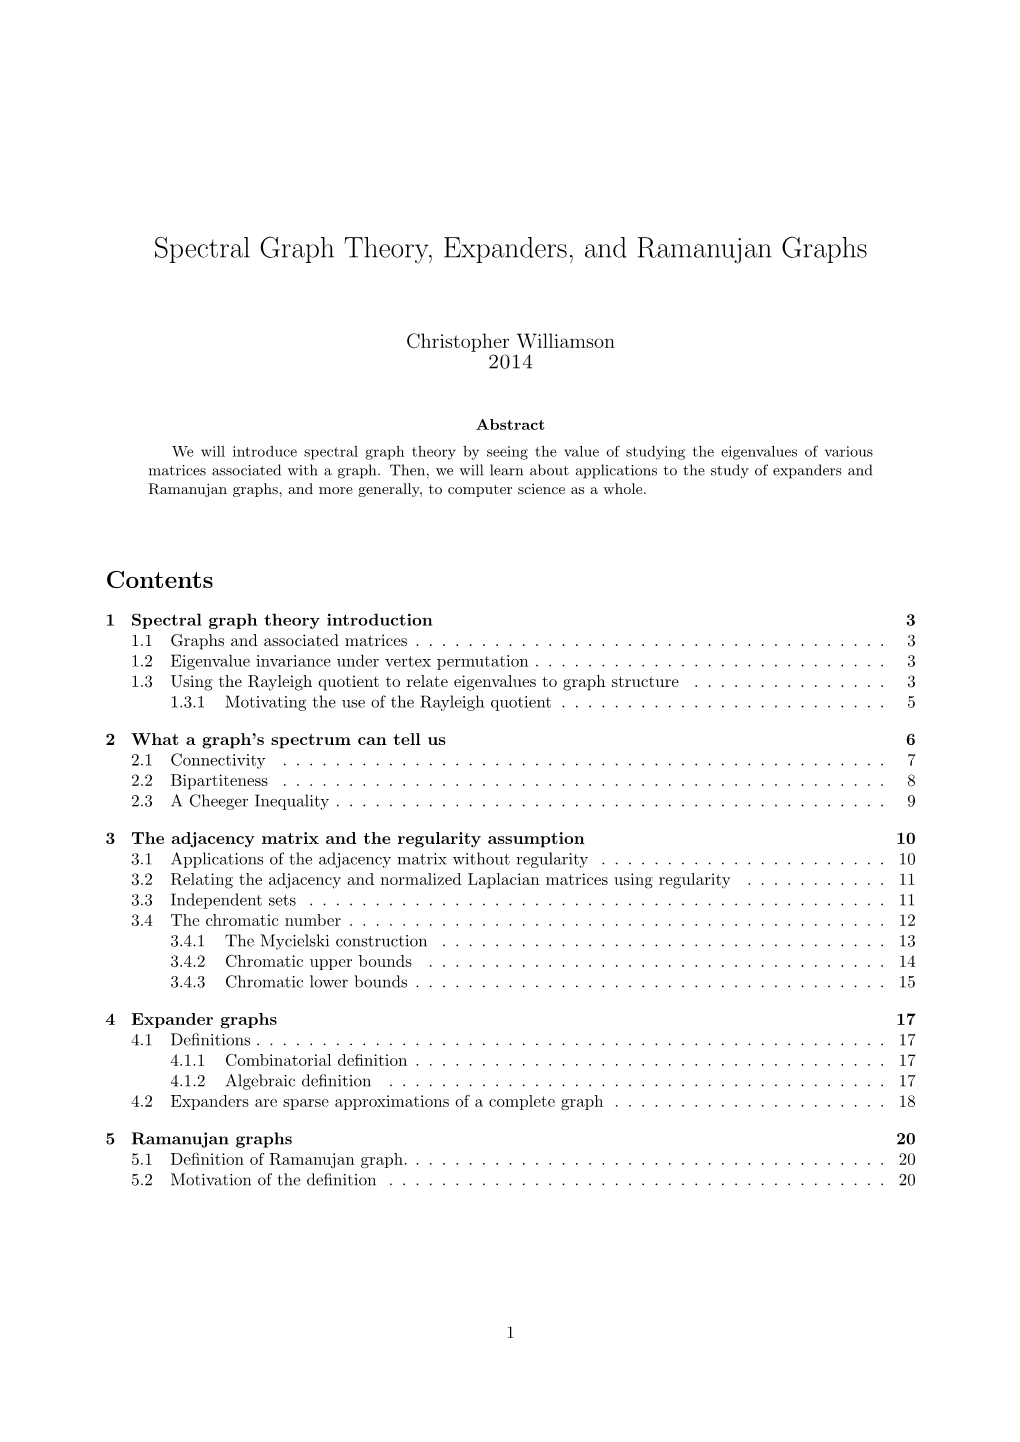 Spectral Graph Theory, Expanders, and Ramanujan Graphs